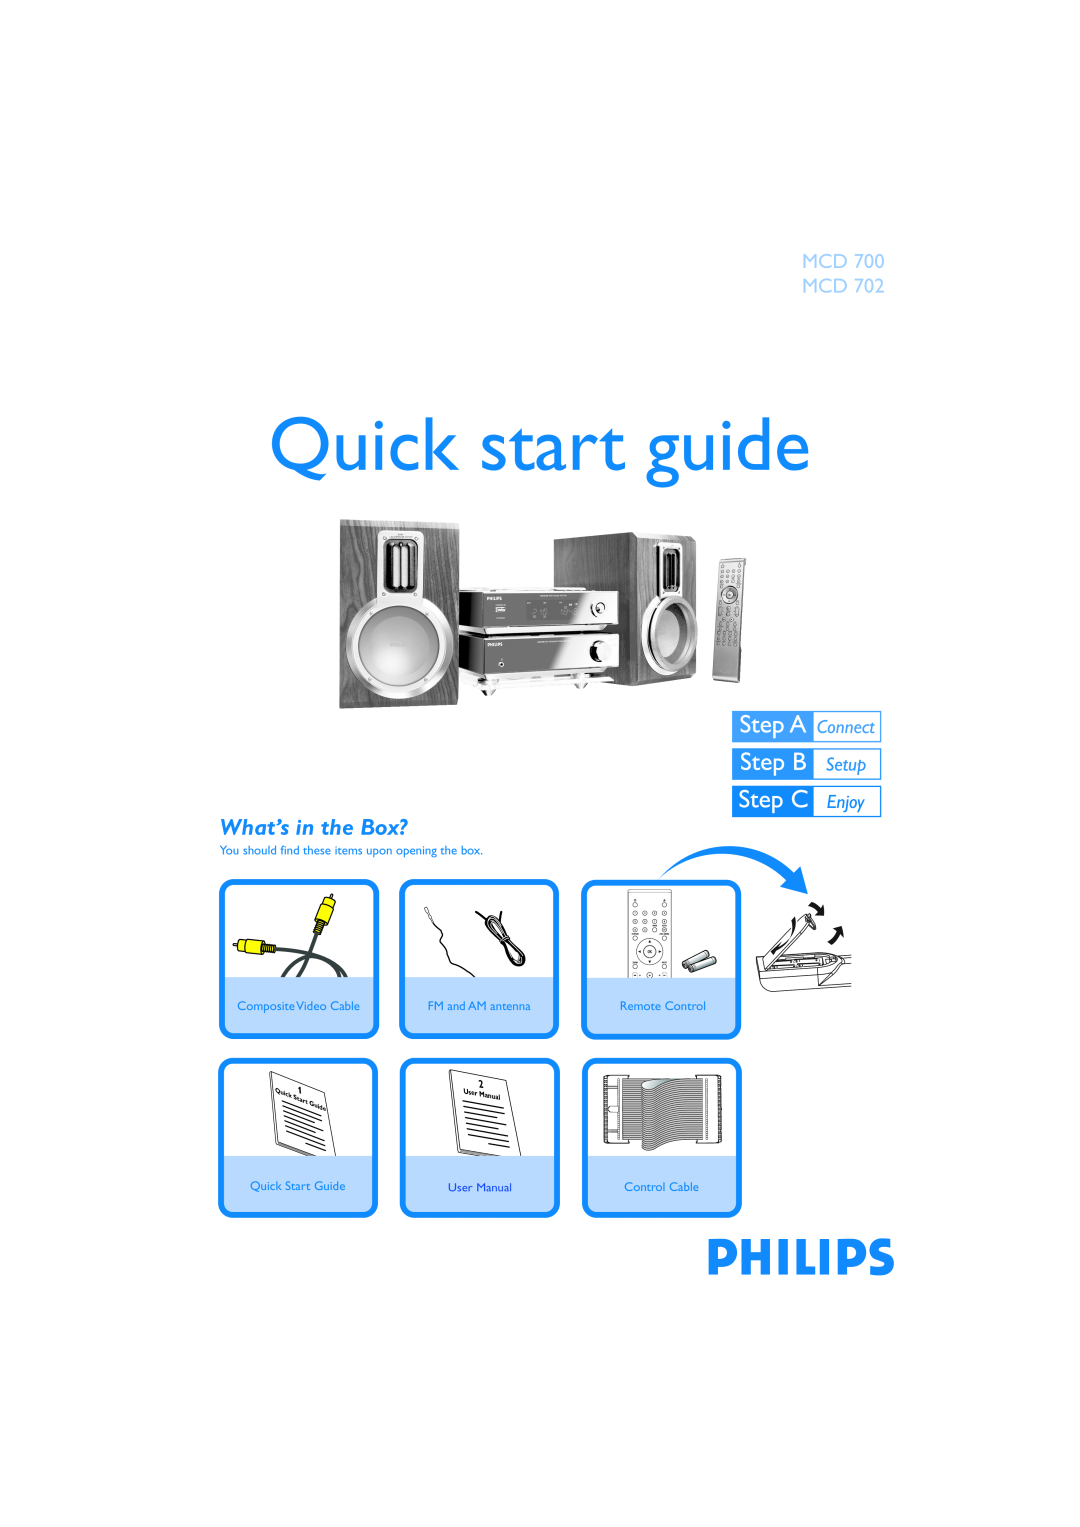 Philips MCL707 quick start What’s in the Box?, MCD700, Quick start guide, Mcd Mcl, Composite Video Cable, Remote Control 